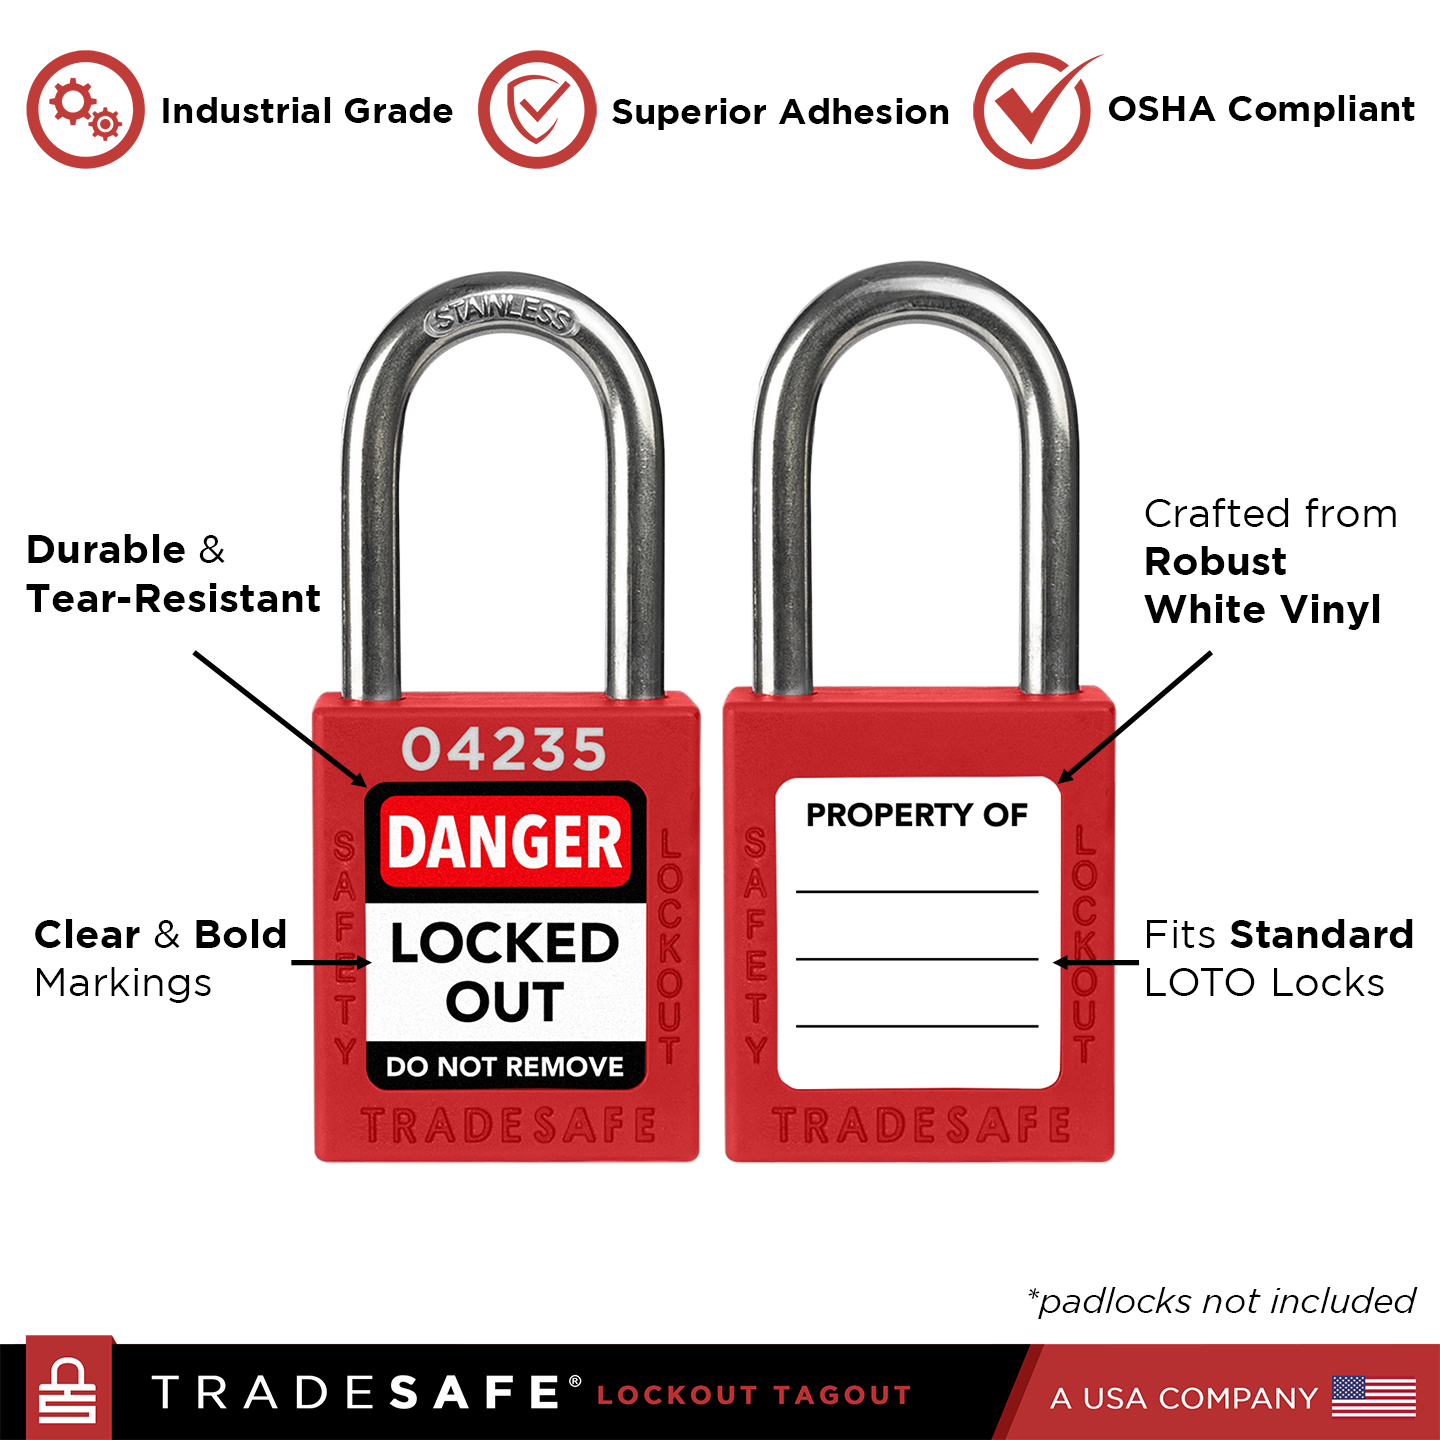 infographic: features of english lockout tagout lock labels